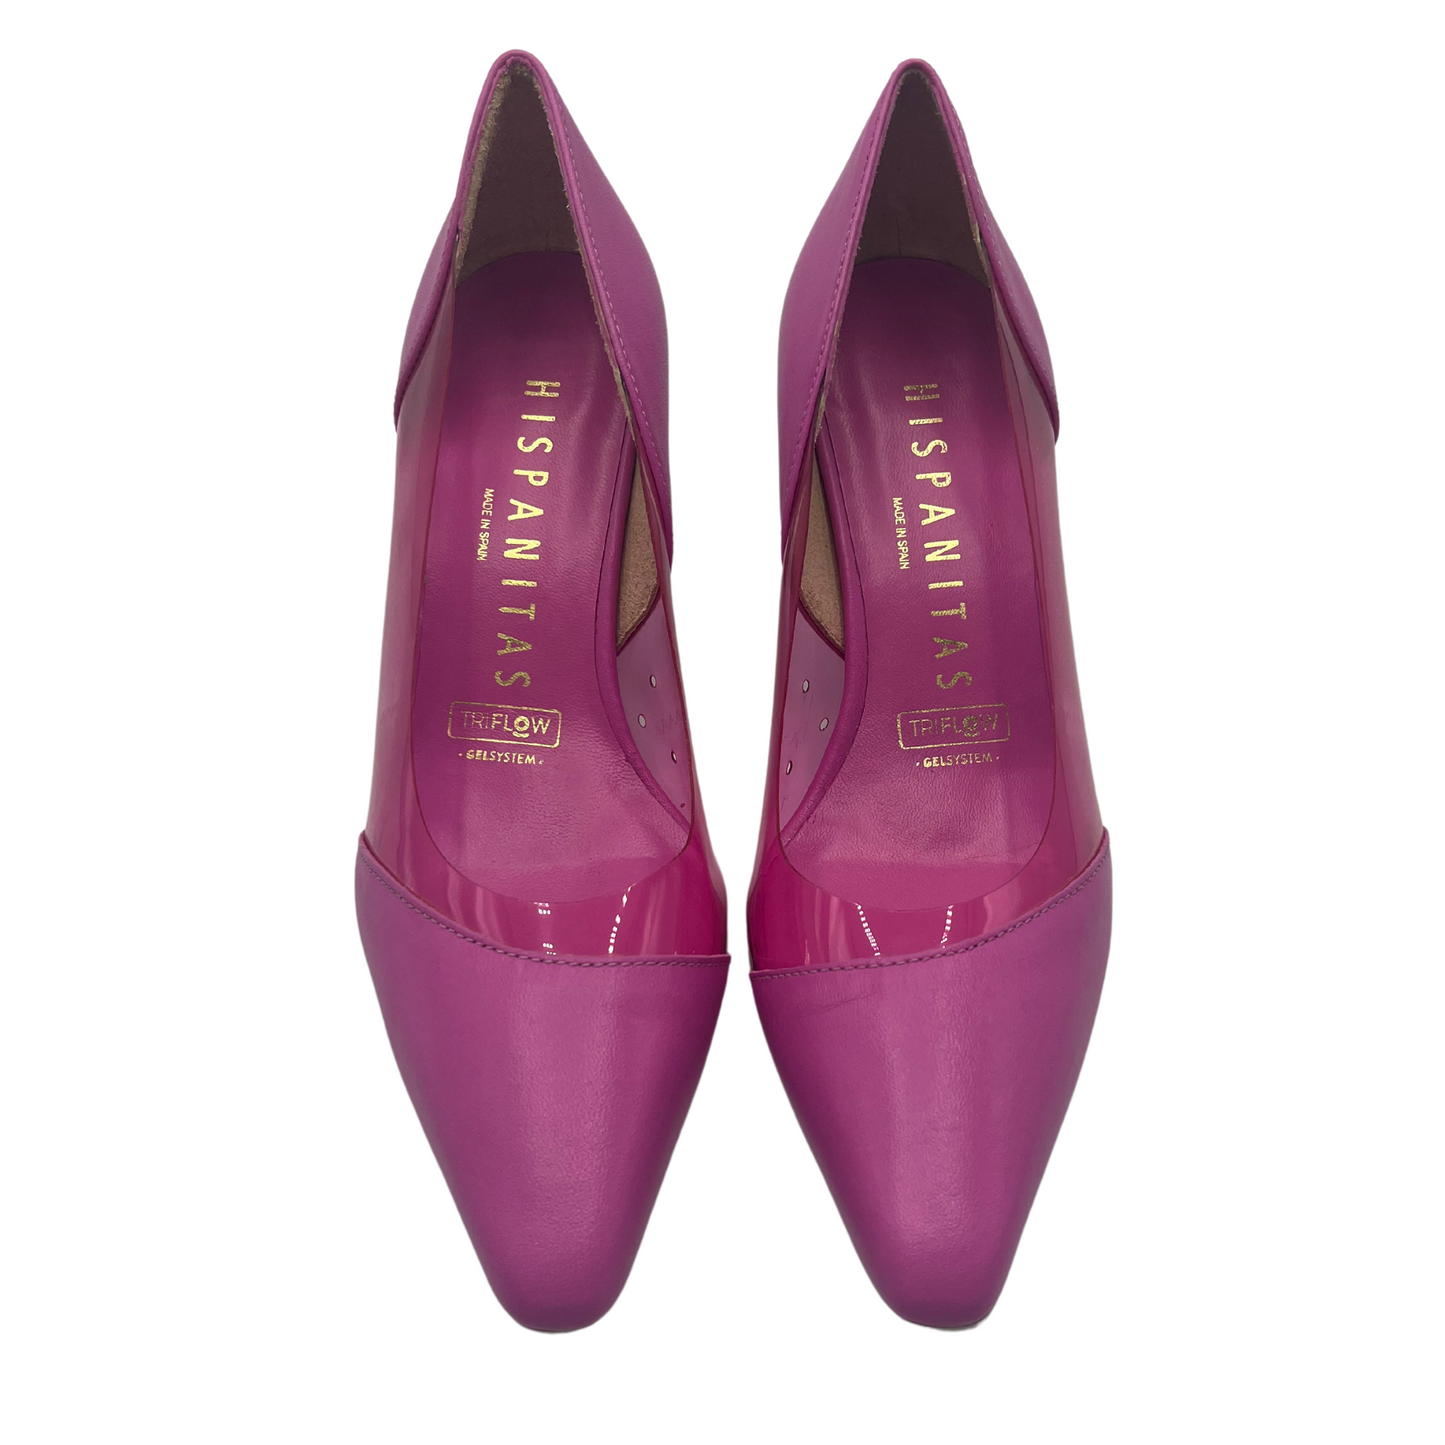 Top view of pink pointed toe pumps with pink leather lining